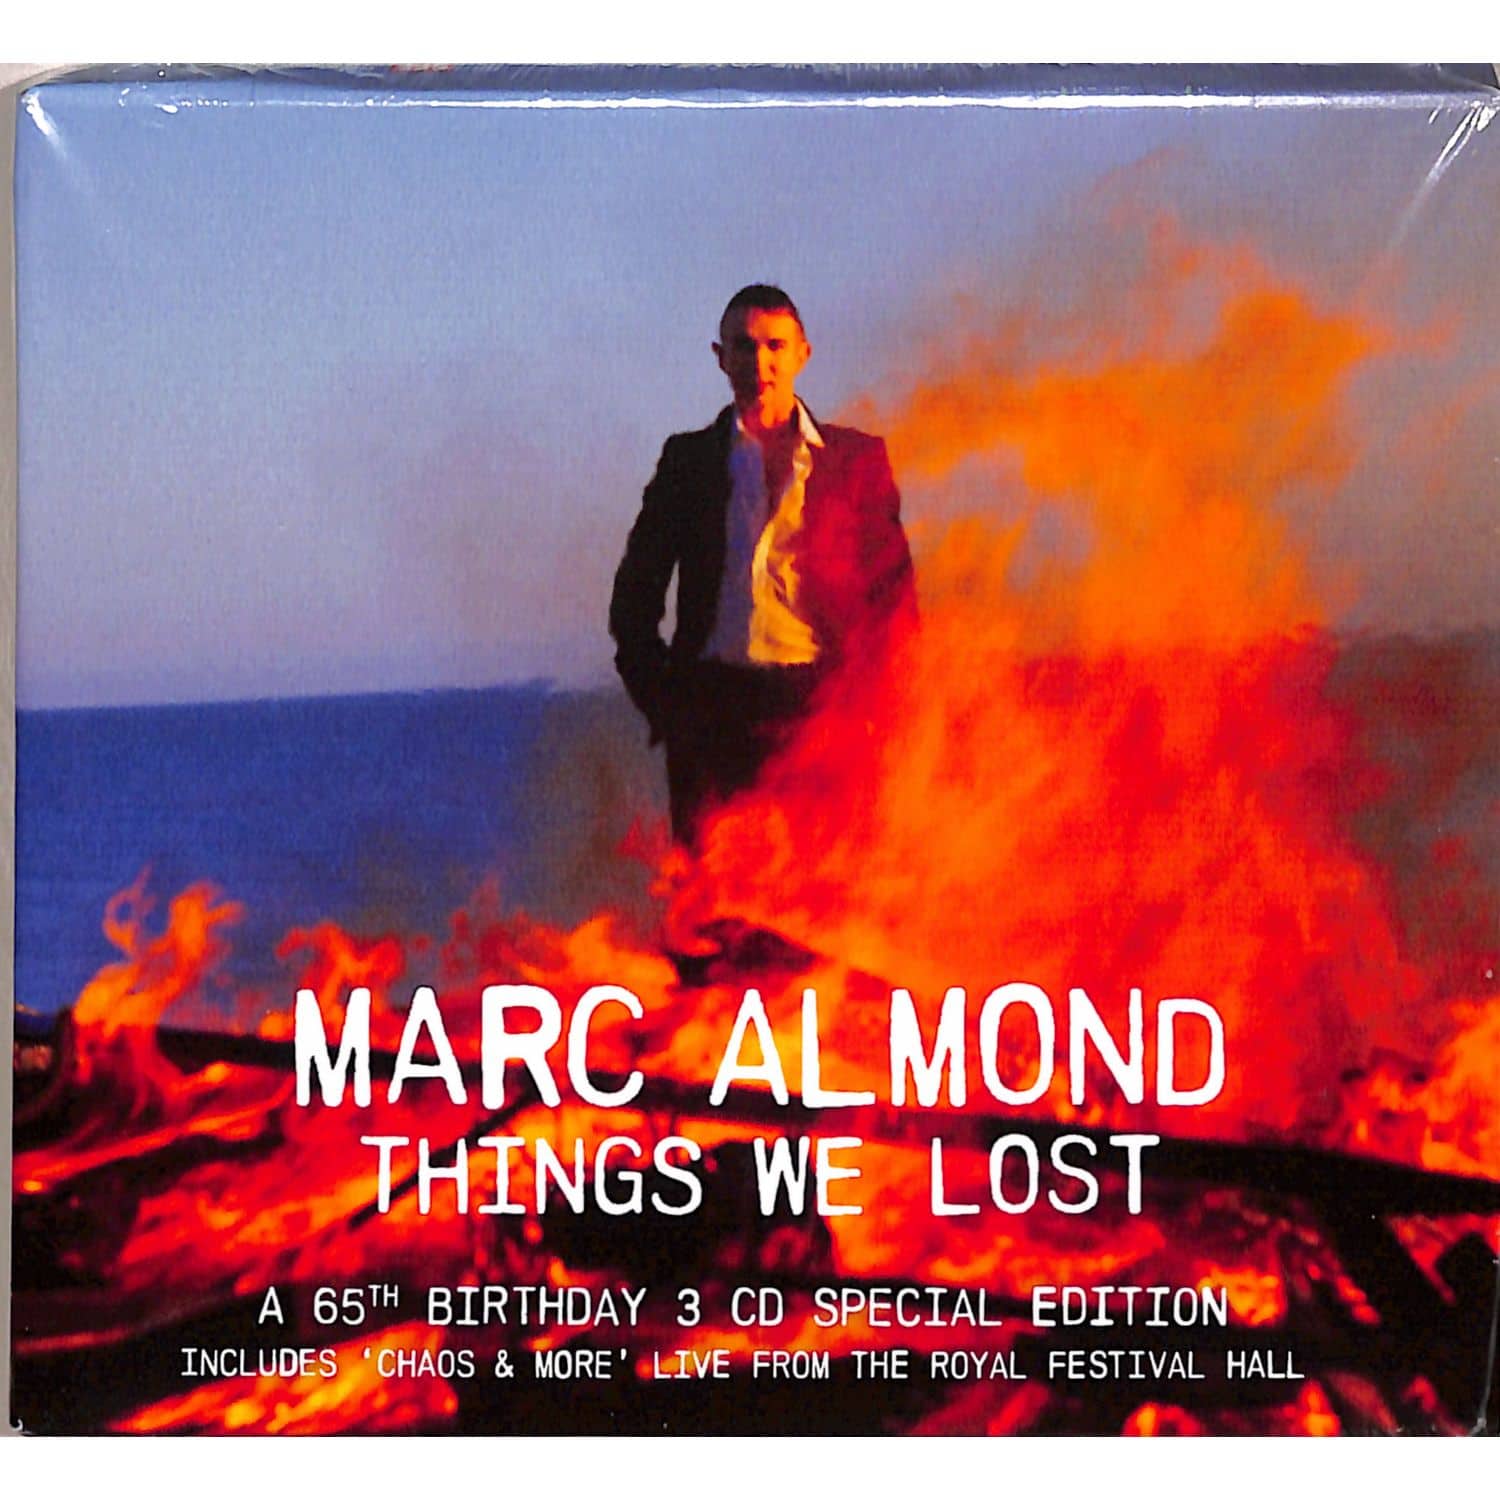 Marc Almond - THE THINGS WE LOST 